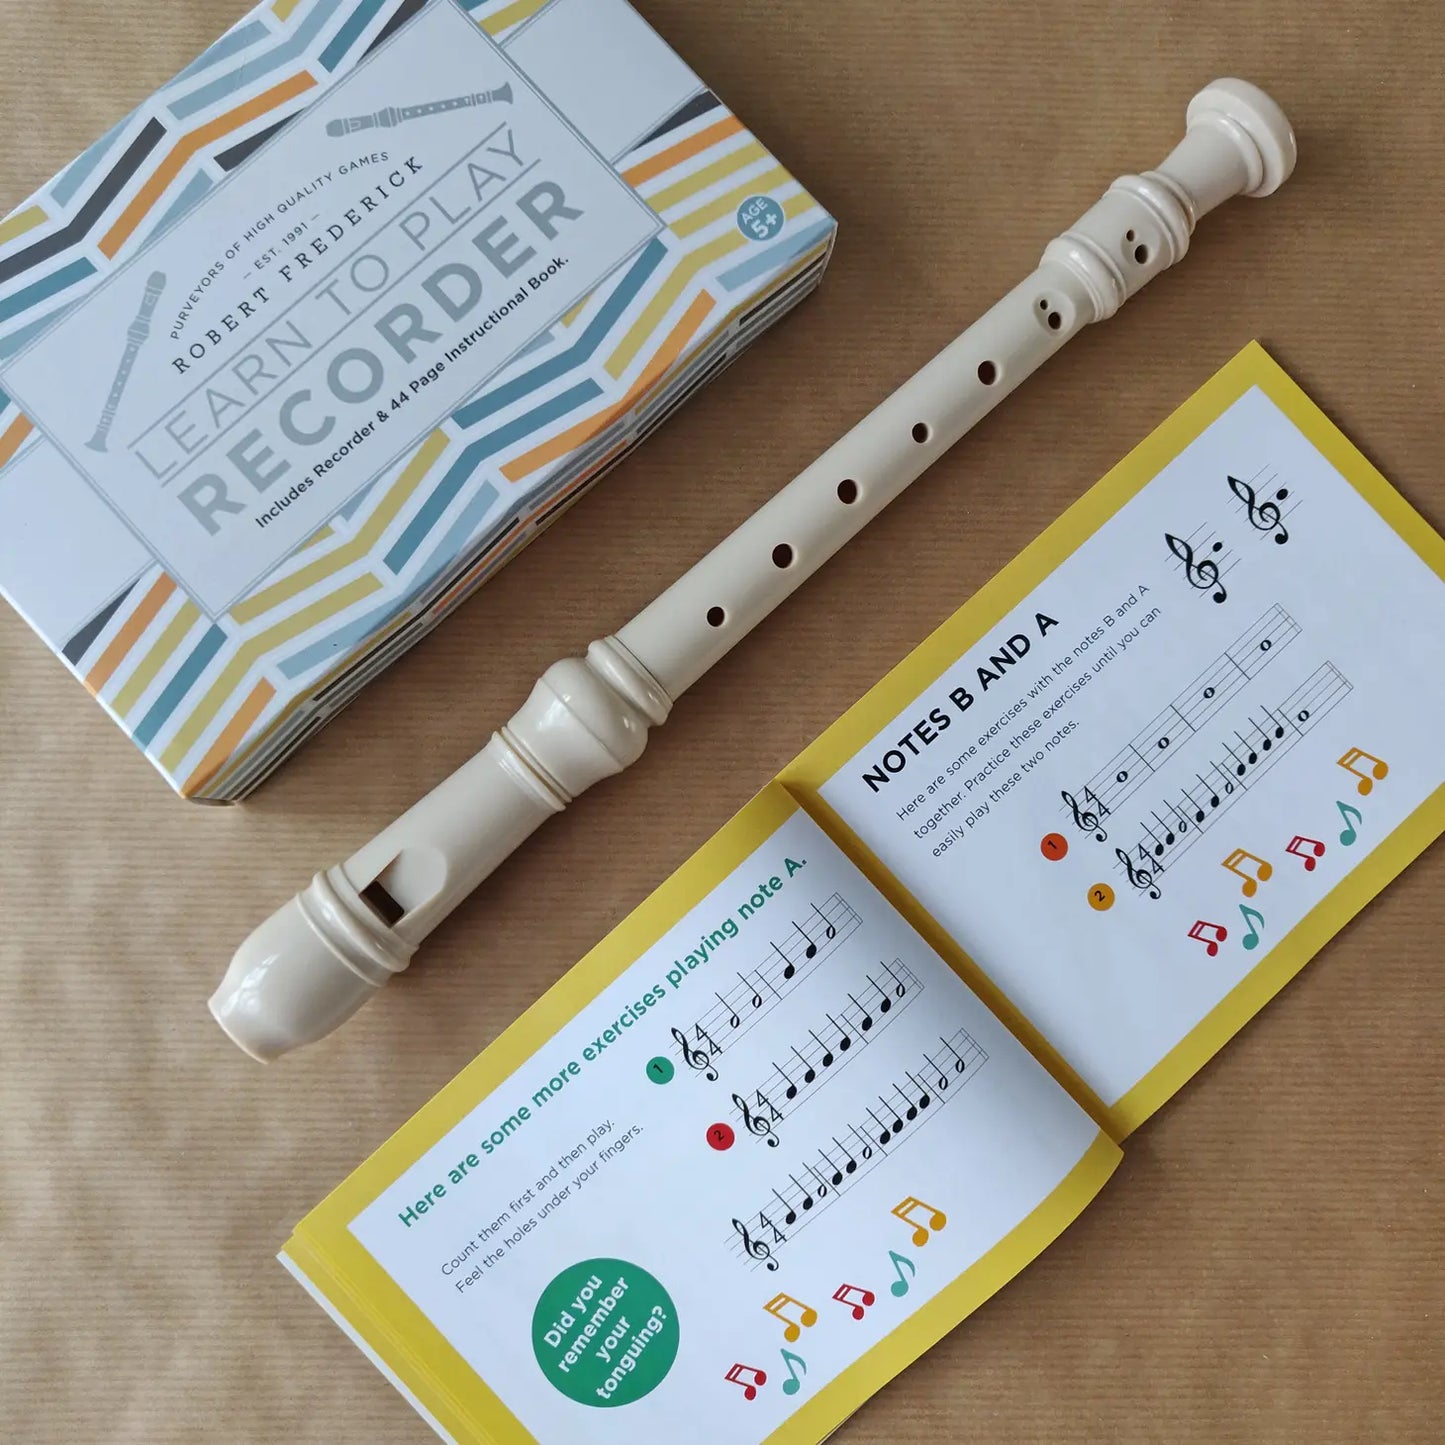 Learn to Play Recorder